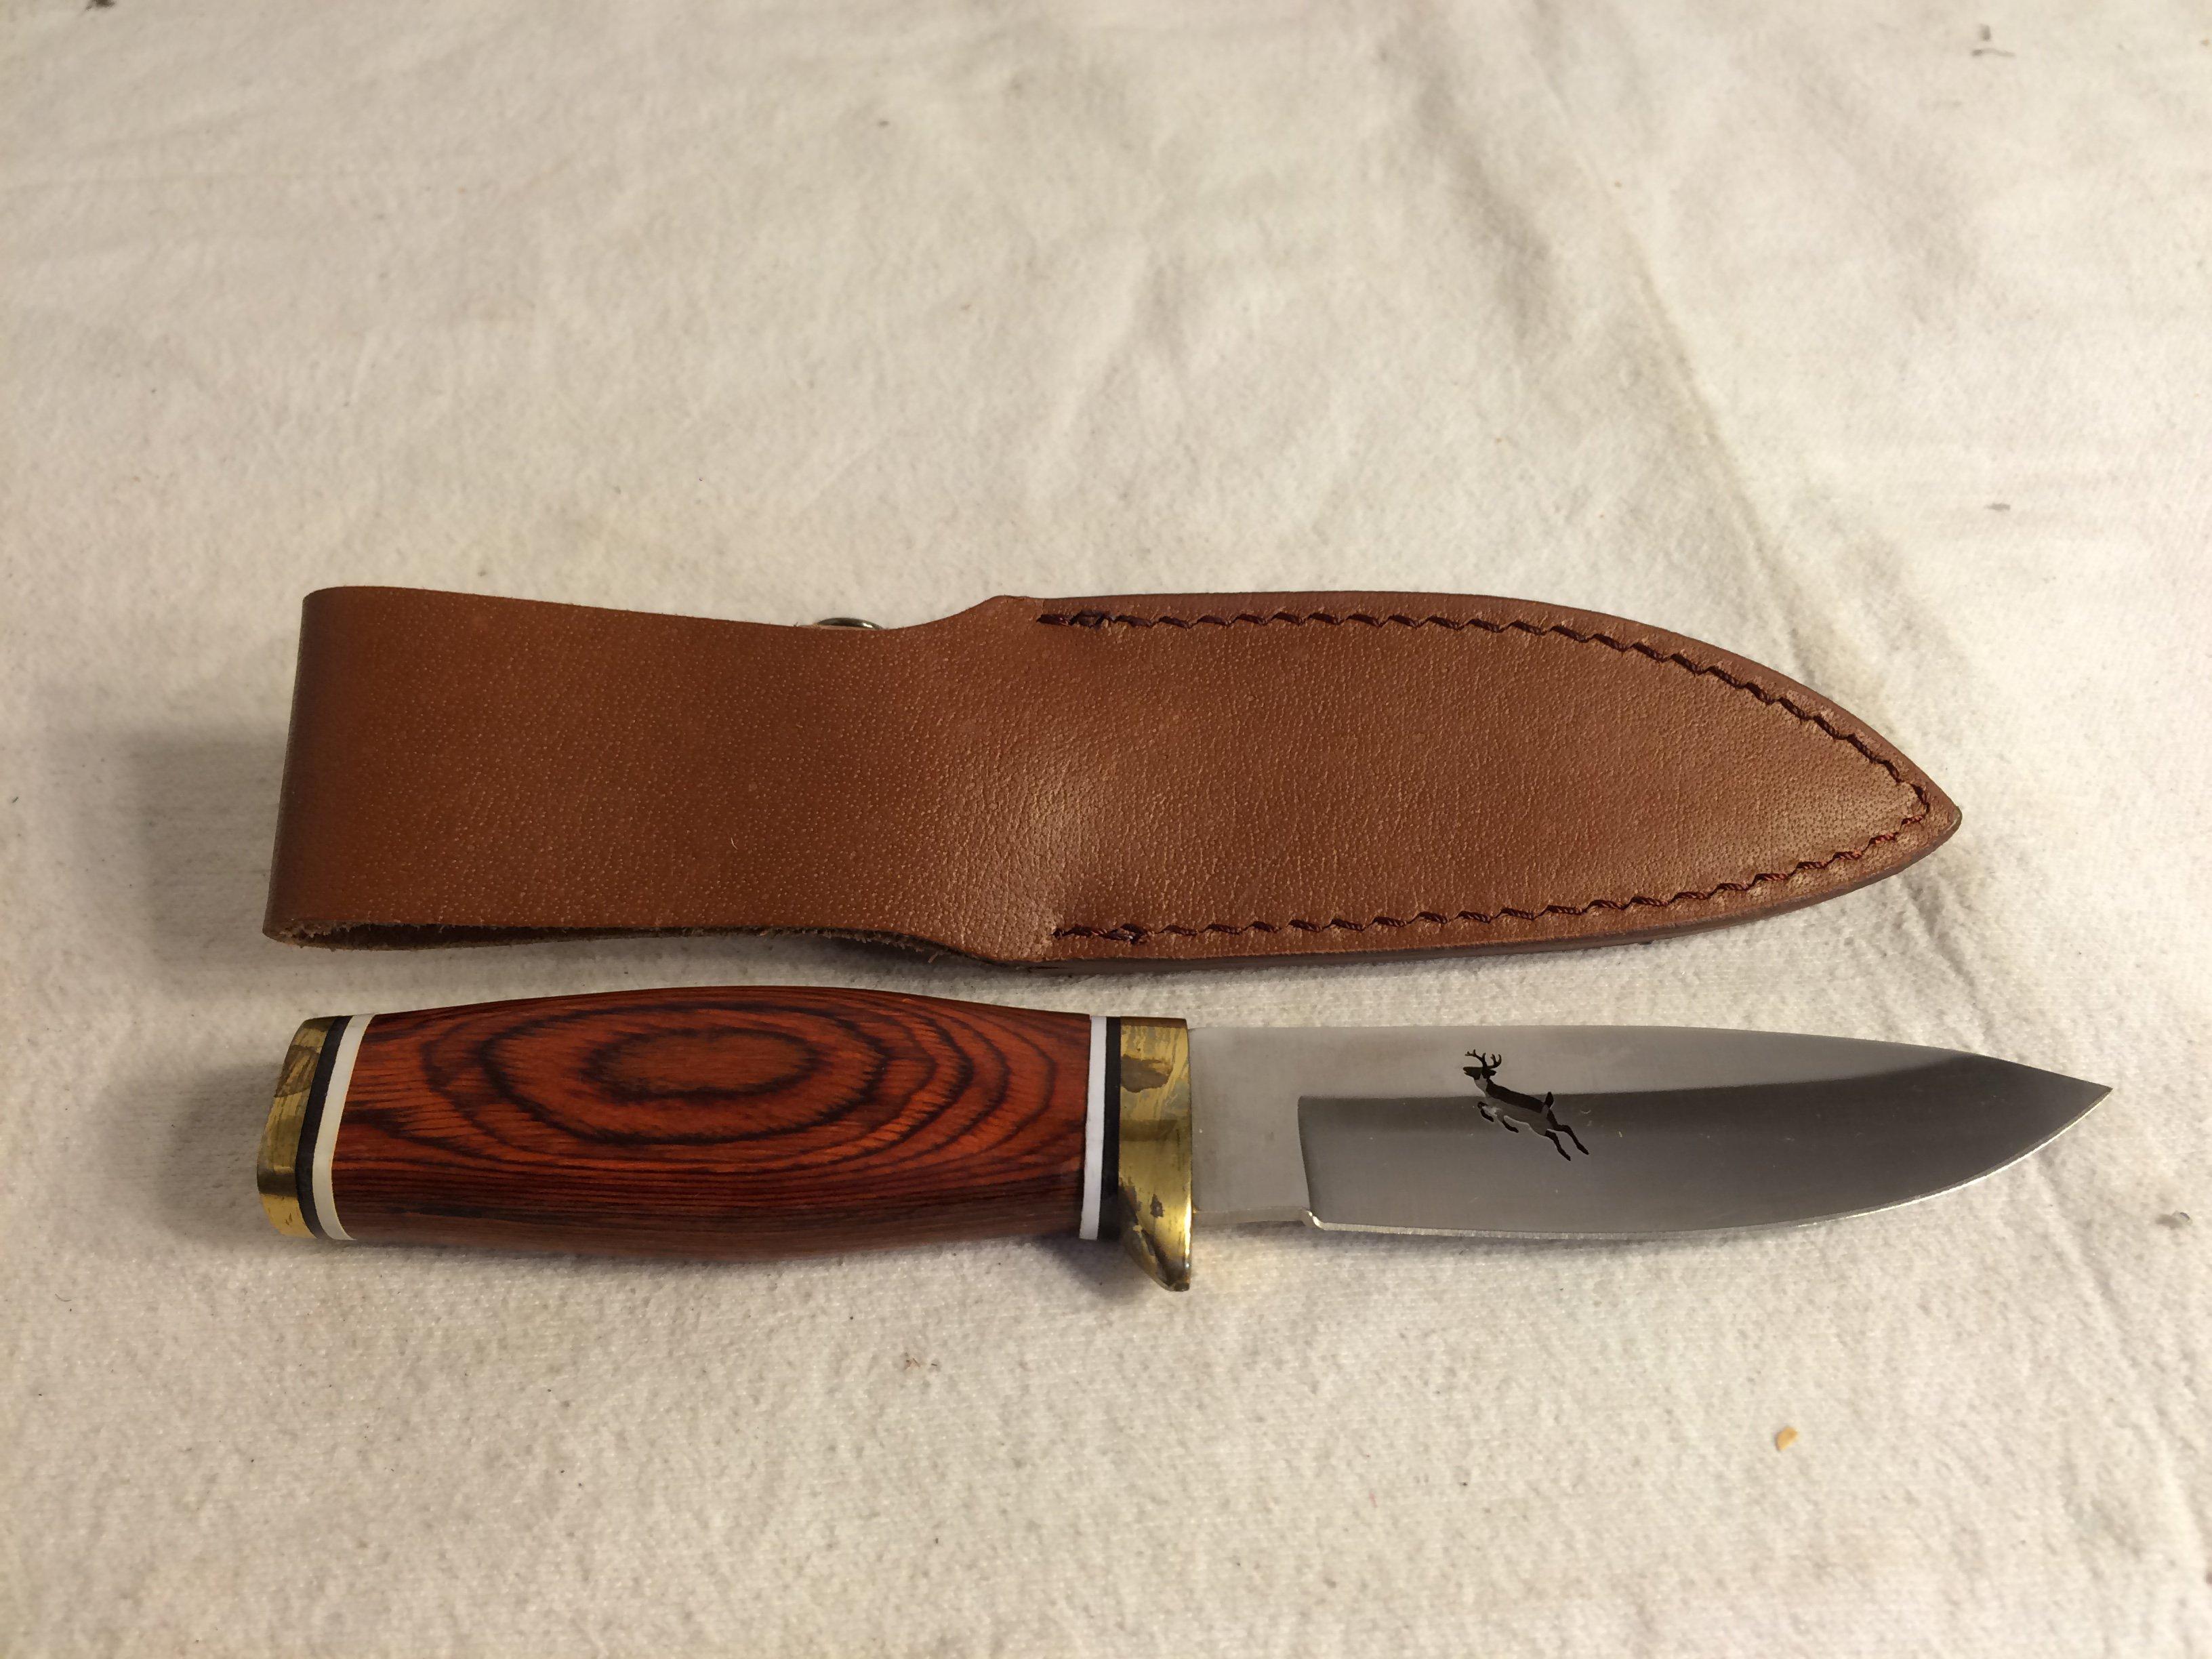 Collector Frost Cutlery Deer Design Wood Handle Hunting Knife Size:8.5/8" Overall Length Knife